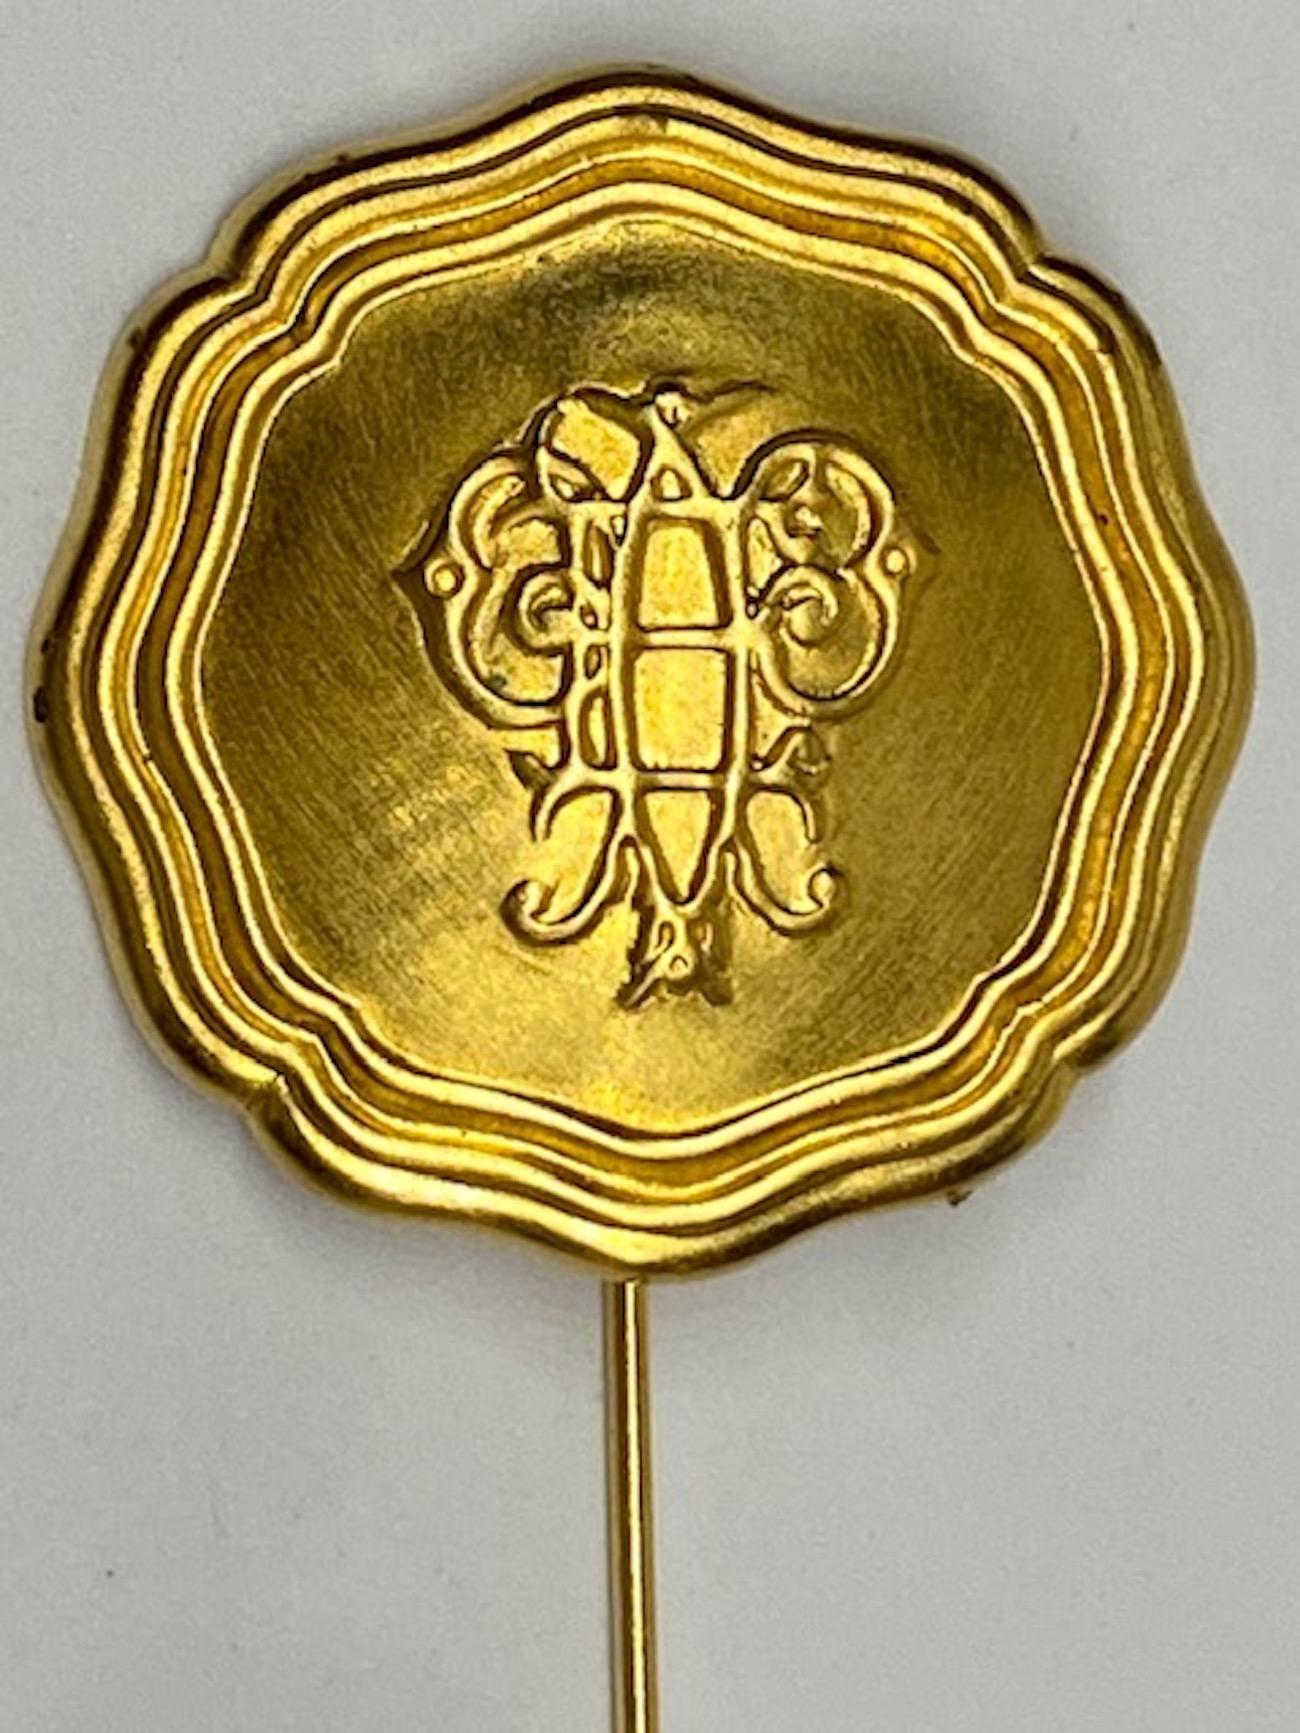 Part of a collection of Emilio Pucci monogramed medallion jewelry from the 1980s. The medallion is satin gold tone and has a scrip monogram of the letter E and P for Emilio Pucci. The medallion is 1.38 inches in diameter. The pin without the